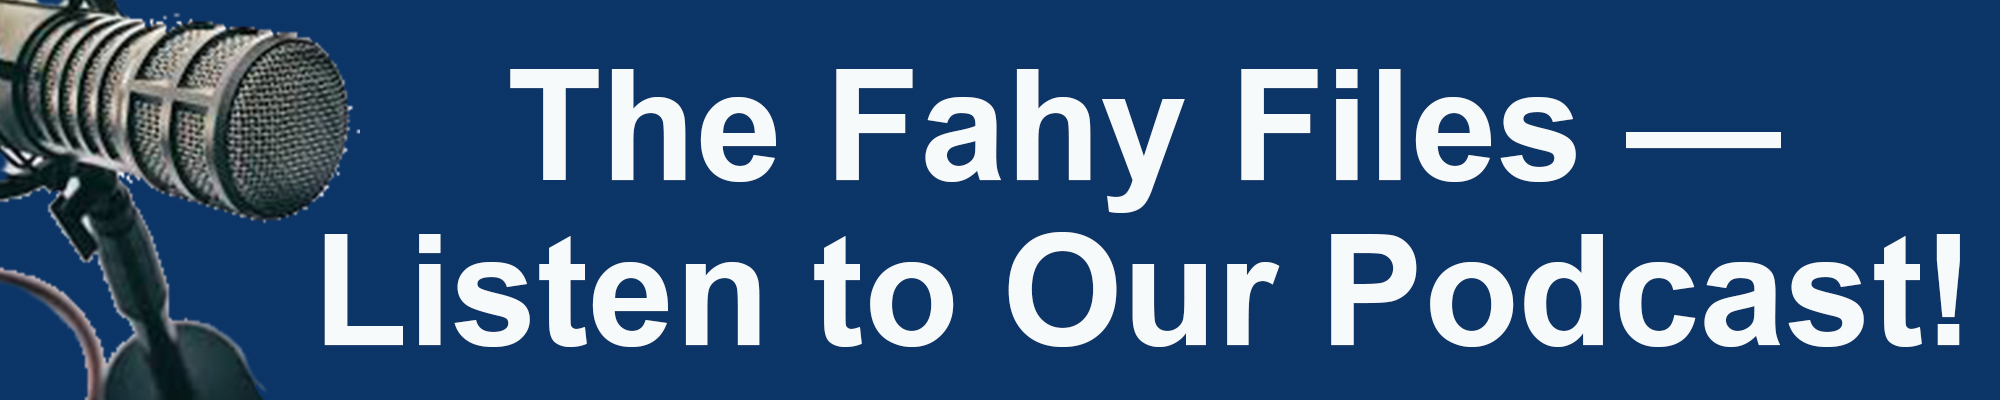 The Fahy Files Listen to our new podcast!